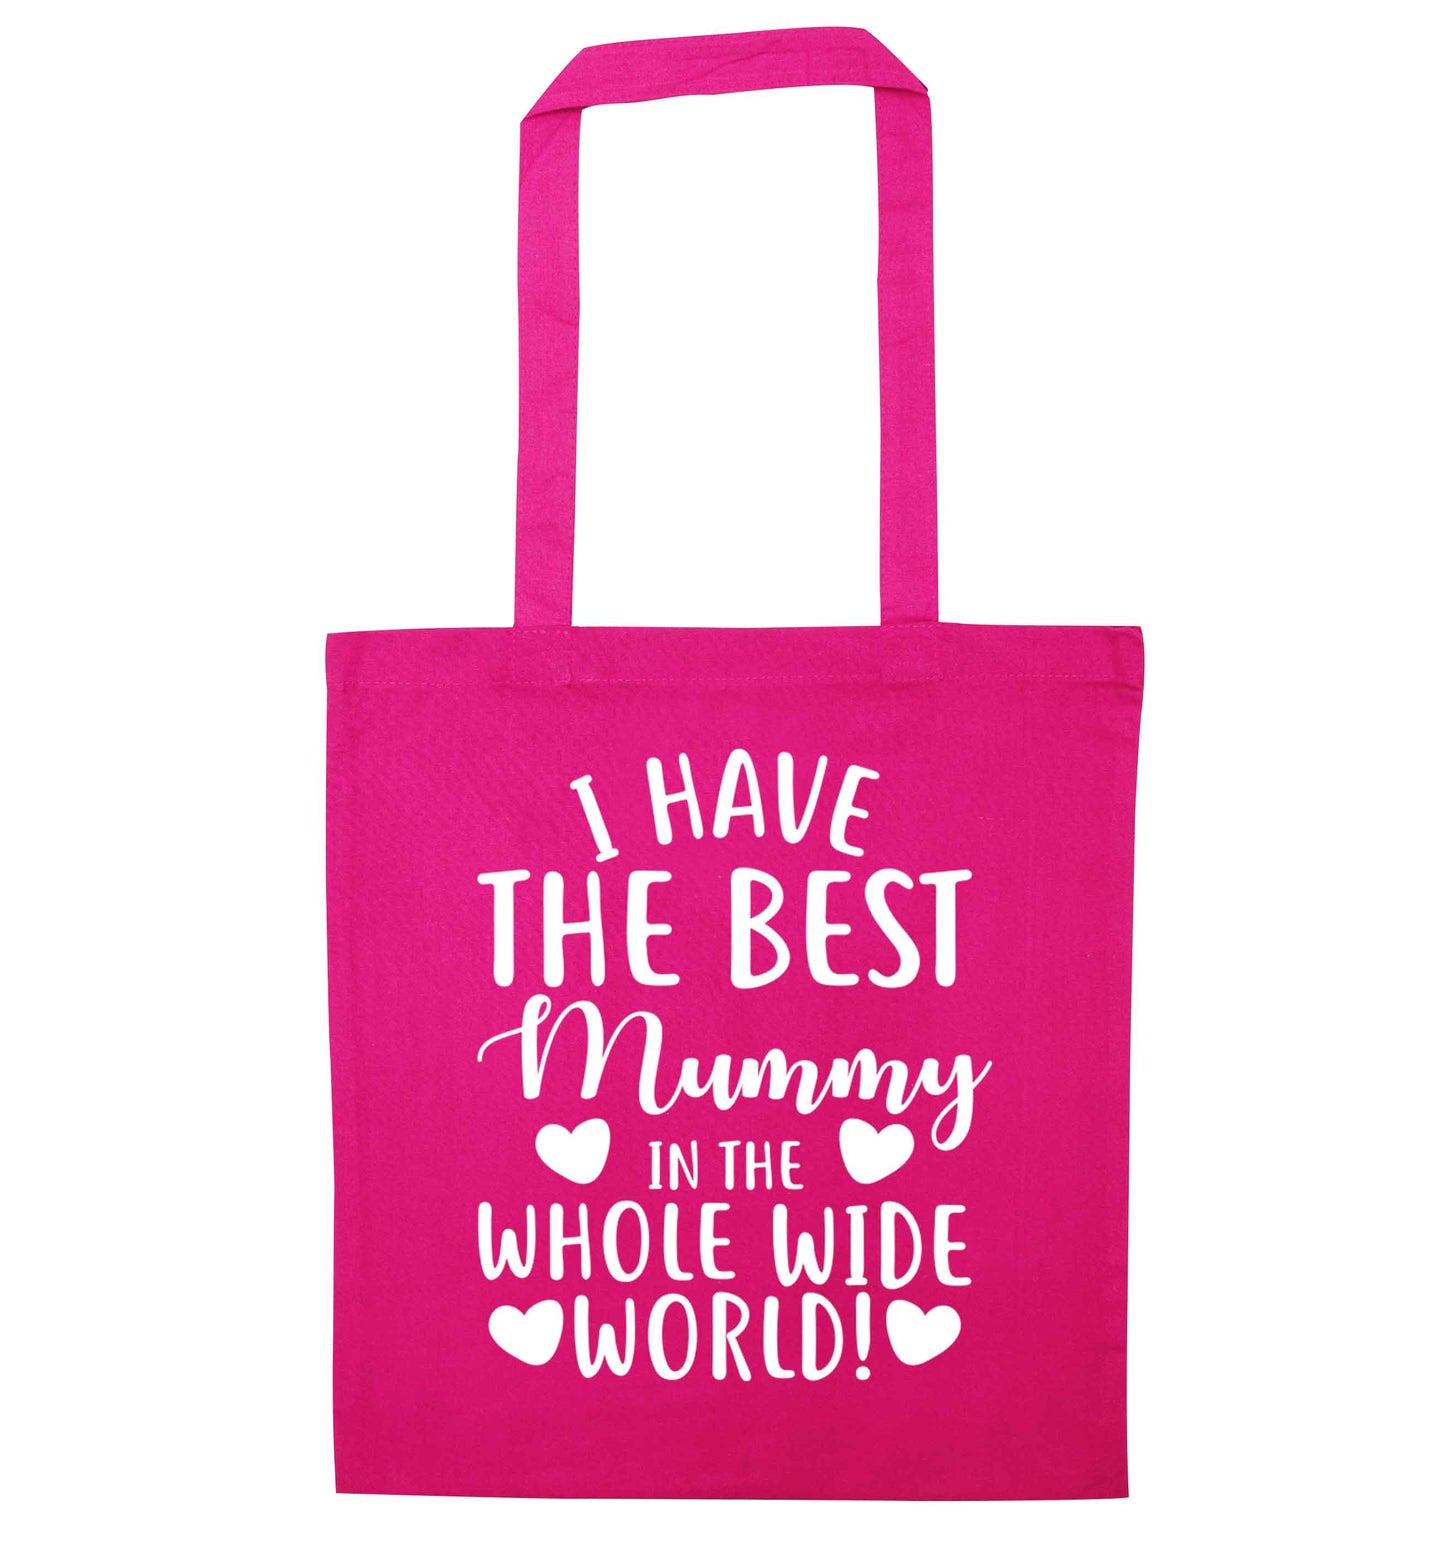 I have the best mummy in the whole wide world pink tote bag